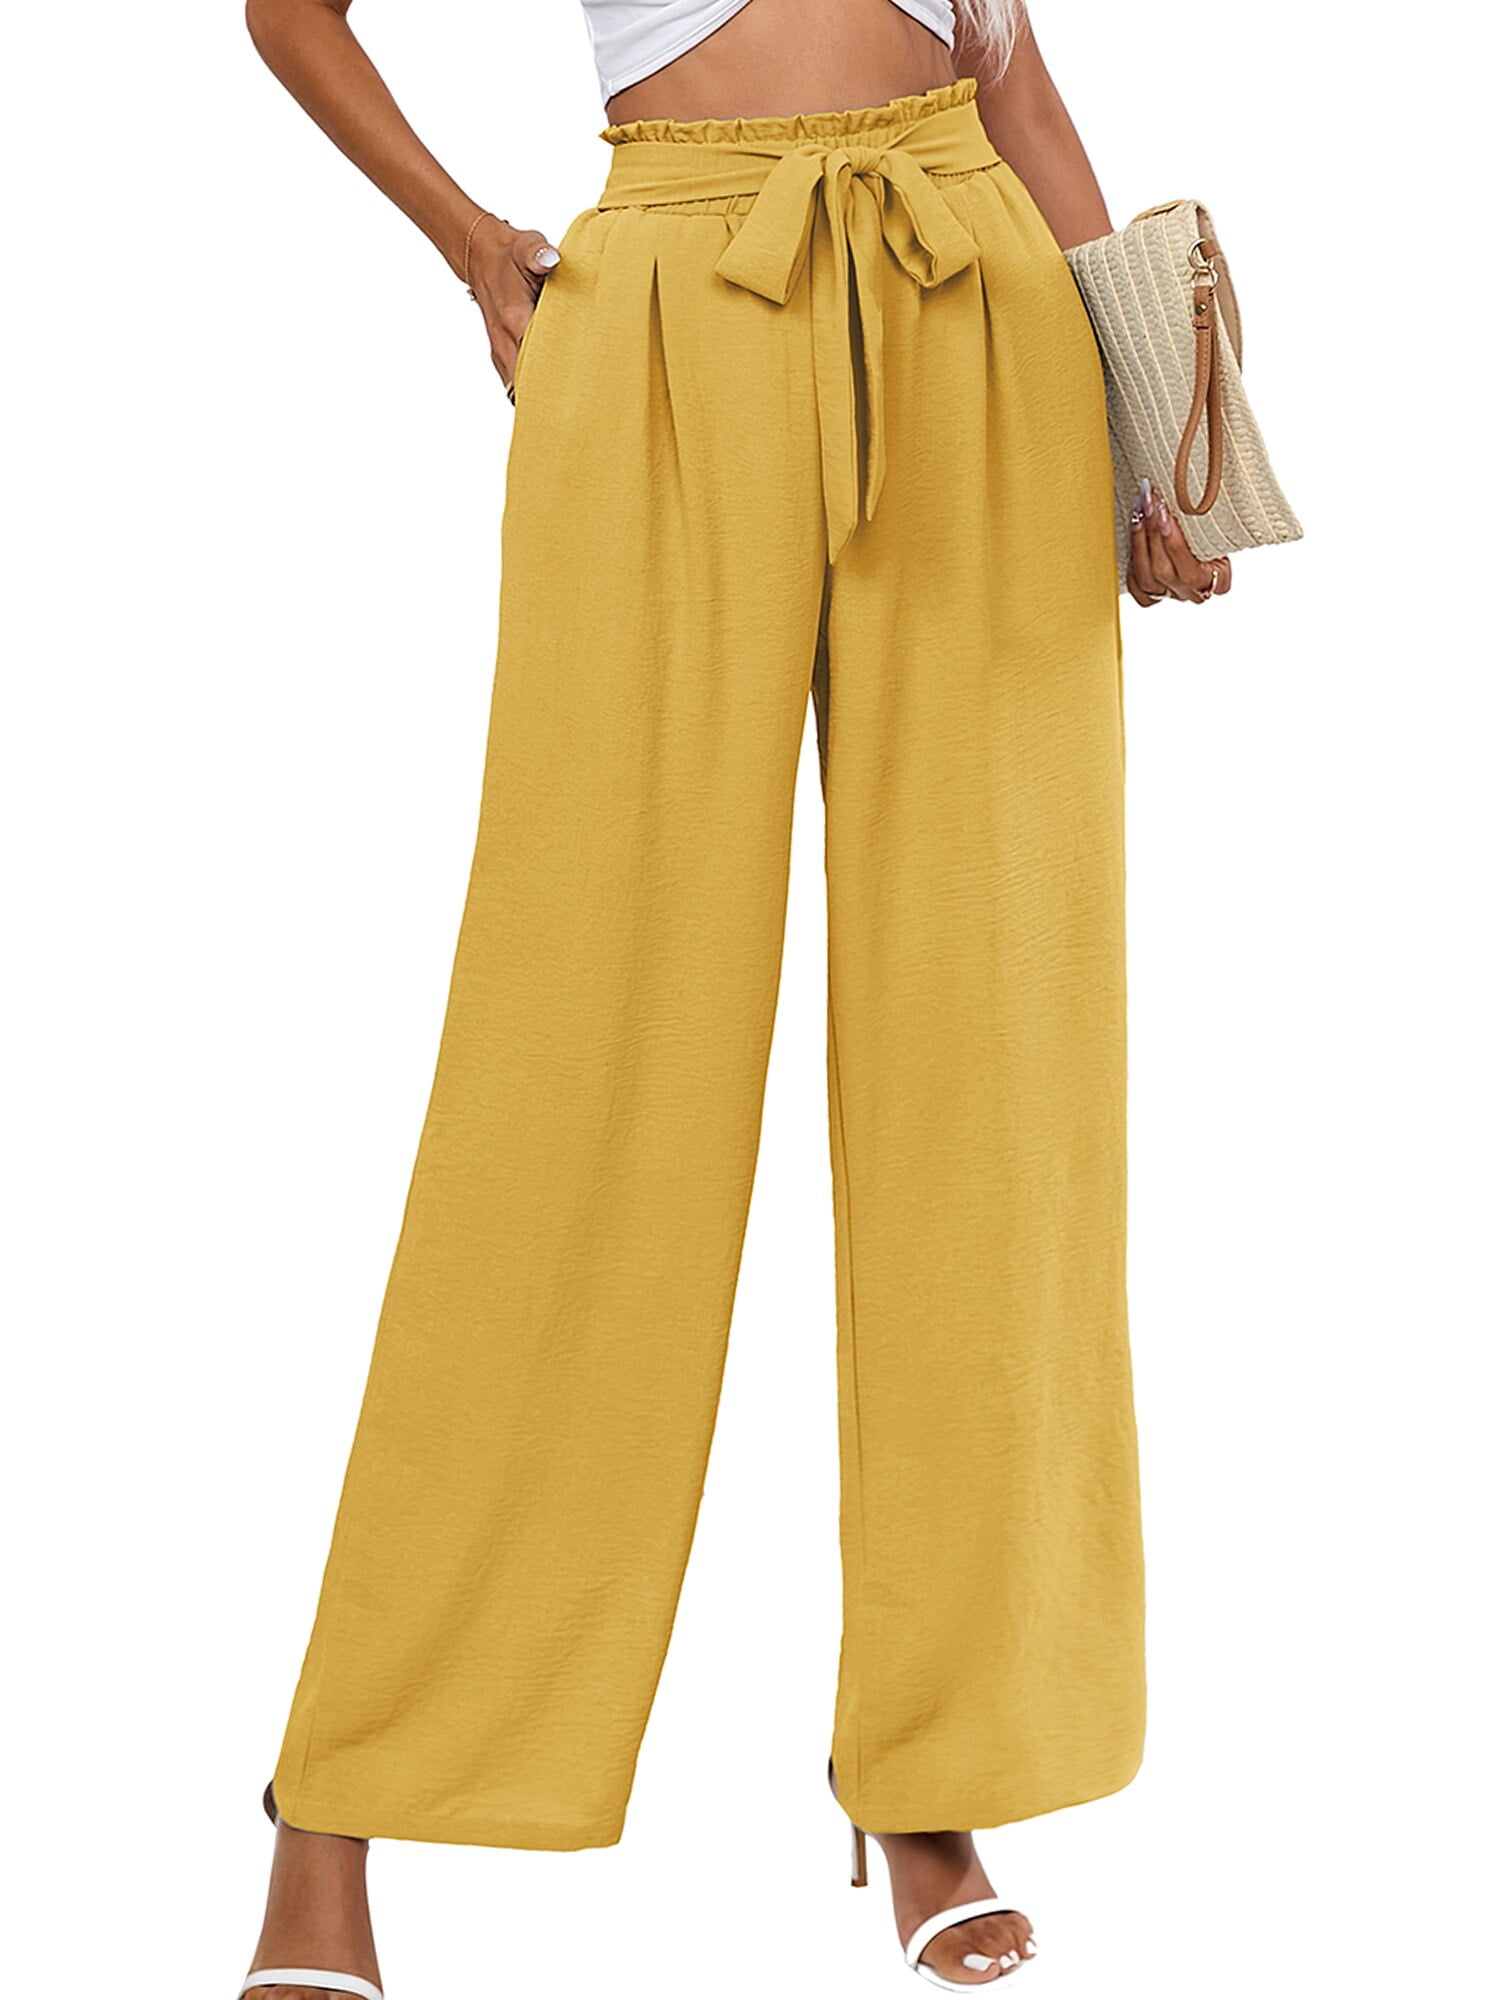 Chiclily Women's Belted Wide Leg Pants with Pockets Lightweight High  Waisted Adjustable Tie Knot Loose Trousers Flowy Summer Beach Lounge Pants,  US Size XL in Wheat 